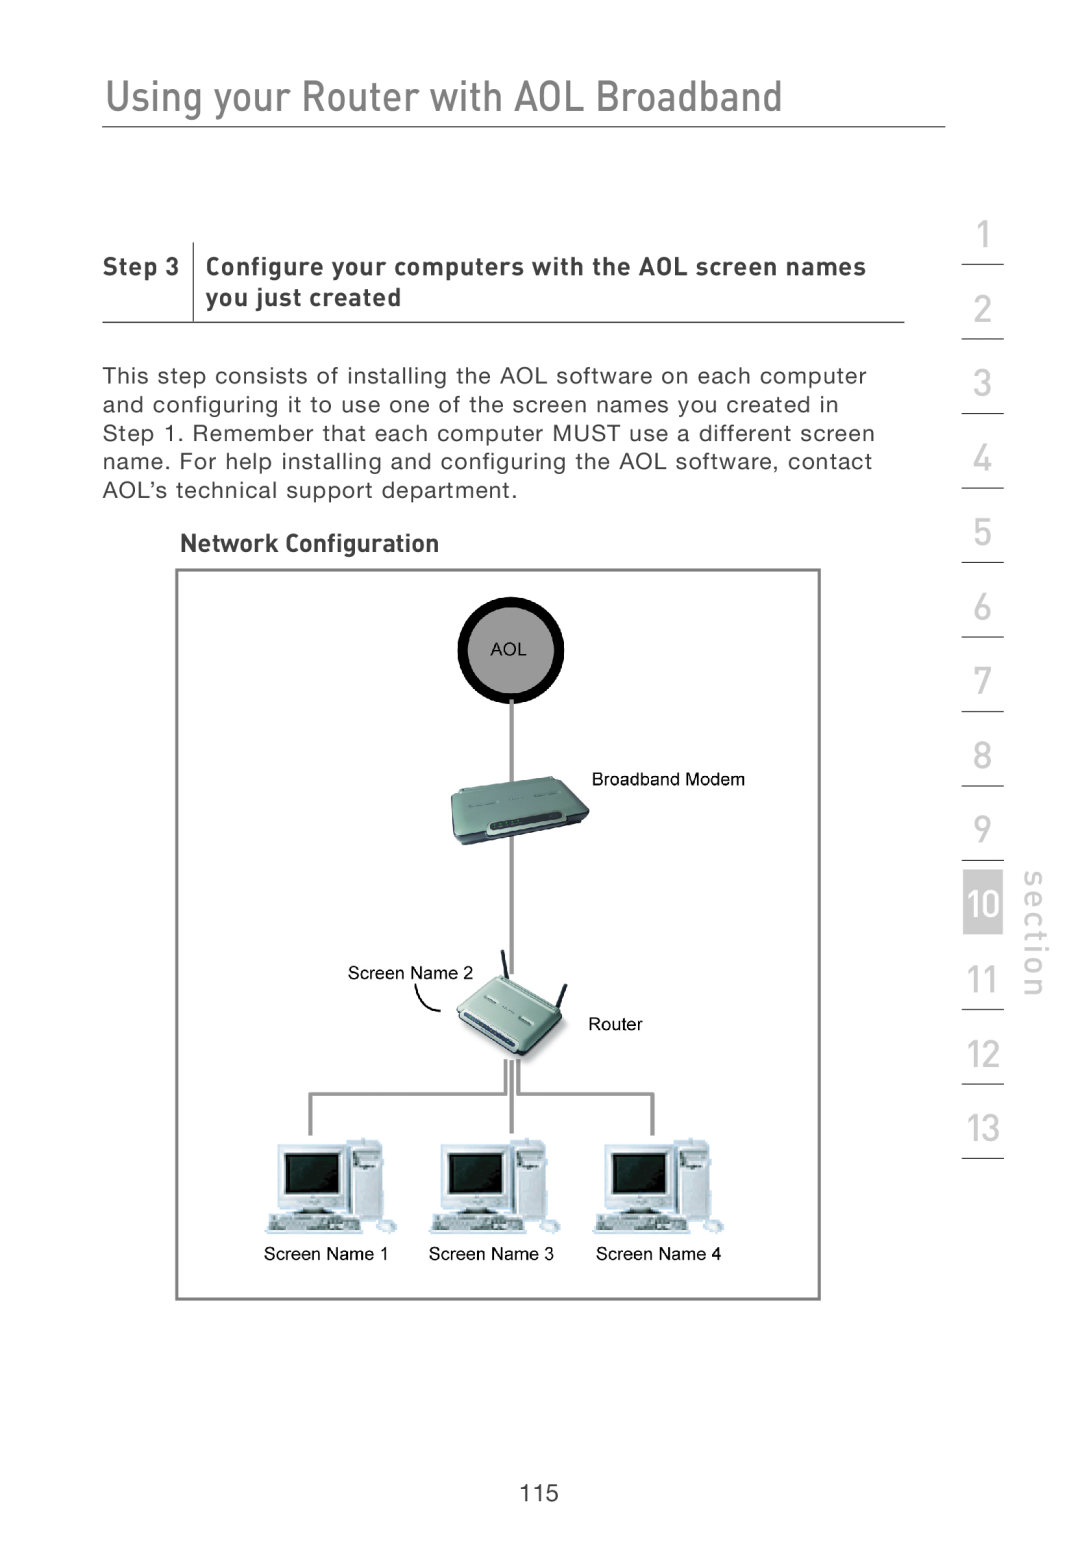 Belkin F5D7231-4P user manual Network Configuration, Using your Router with AOL Broadband, section 